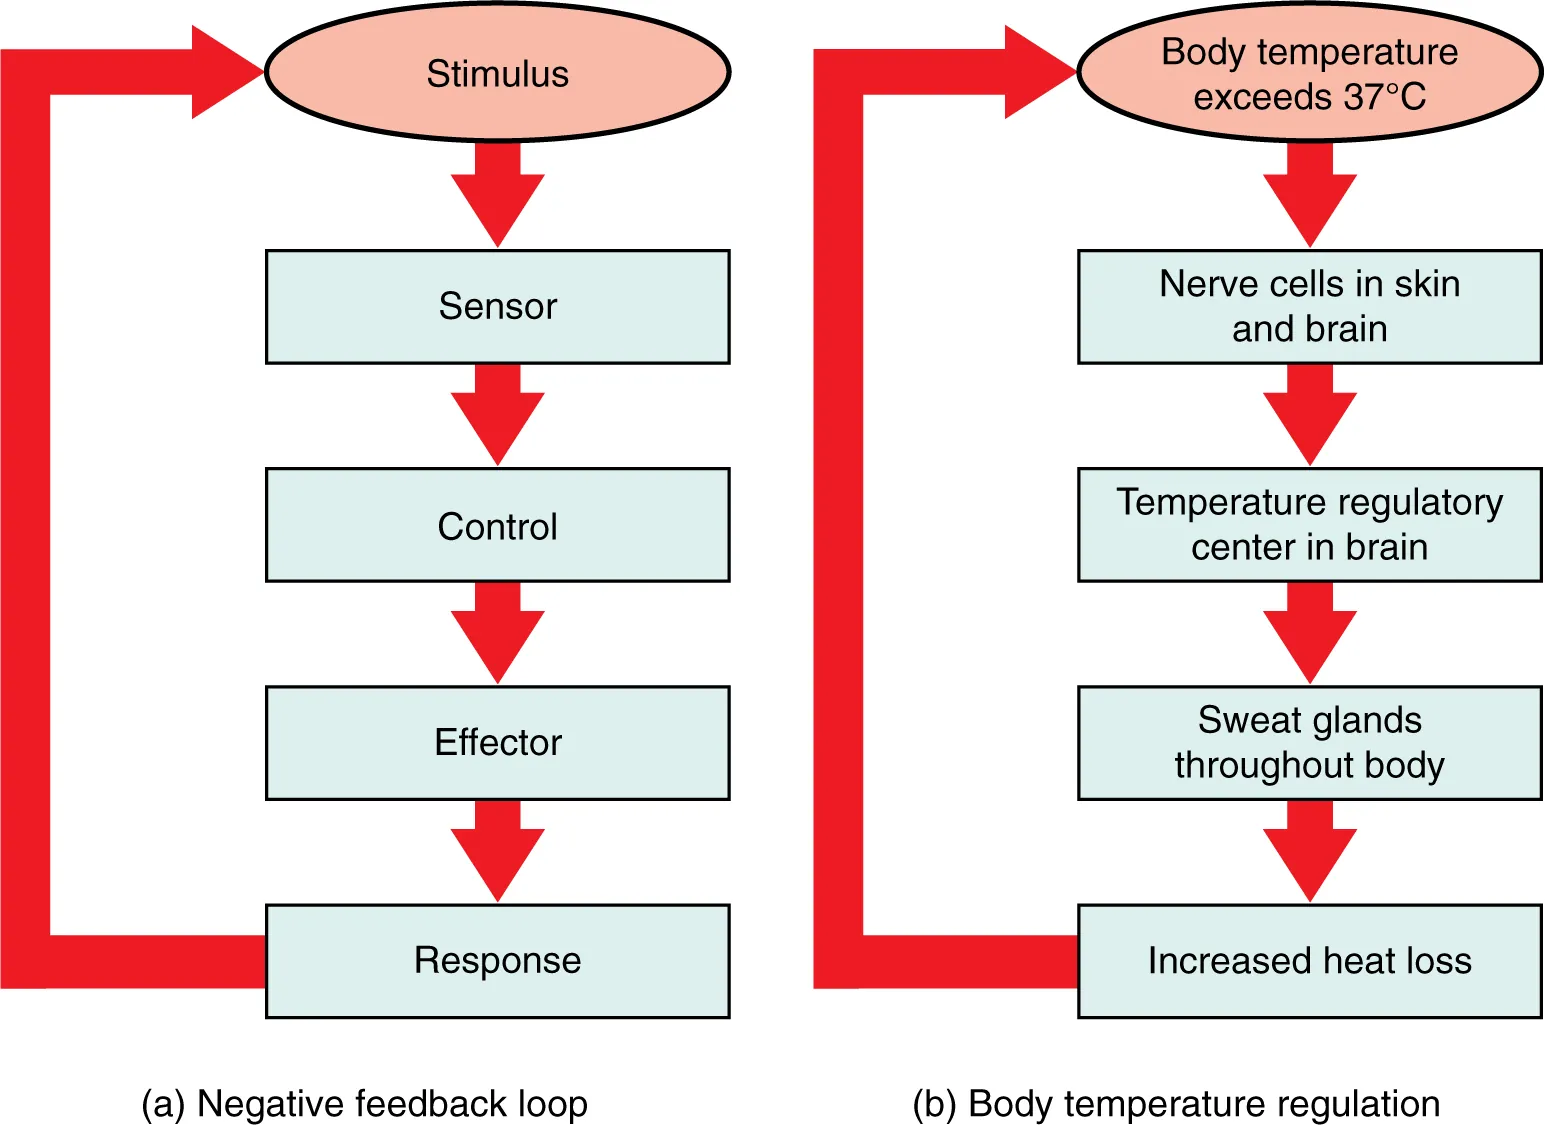 This figure shows two flow charts labeled A and B. Chart A shows a general negative feedback loop. The loop starts with a stimulus. Information about the stimulus is perceived by a sensor which sends that information to a control center. The control center sends a signal to an effector, which creates a response. That then feeds back to the top of the flow chart by inhibiting the stimulus. Part B shows body temperature regulation as an example of negative feedback system. Here, the stimulus is body temperature exceeding 37 degrees Celsius. The sensor is a set of nerve cells in the skin and brain and the control center is the temperature regulatory center of the brain. The effectors are sweat glands throughout the body which lead to increased heat loss and inhibit the rising body temperature.